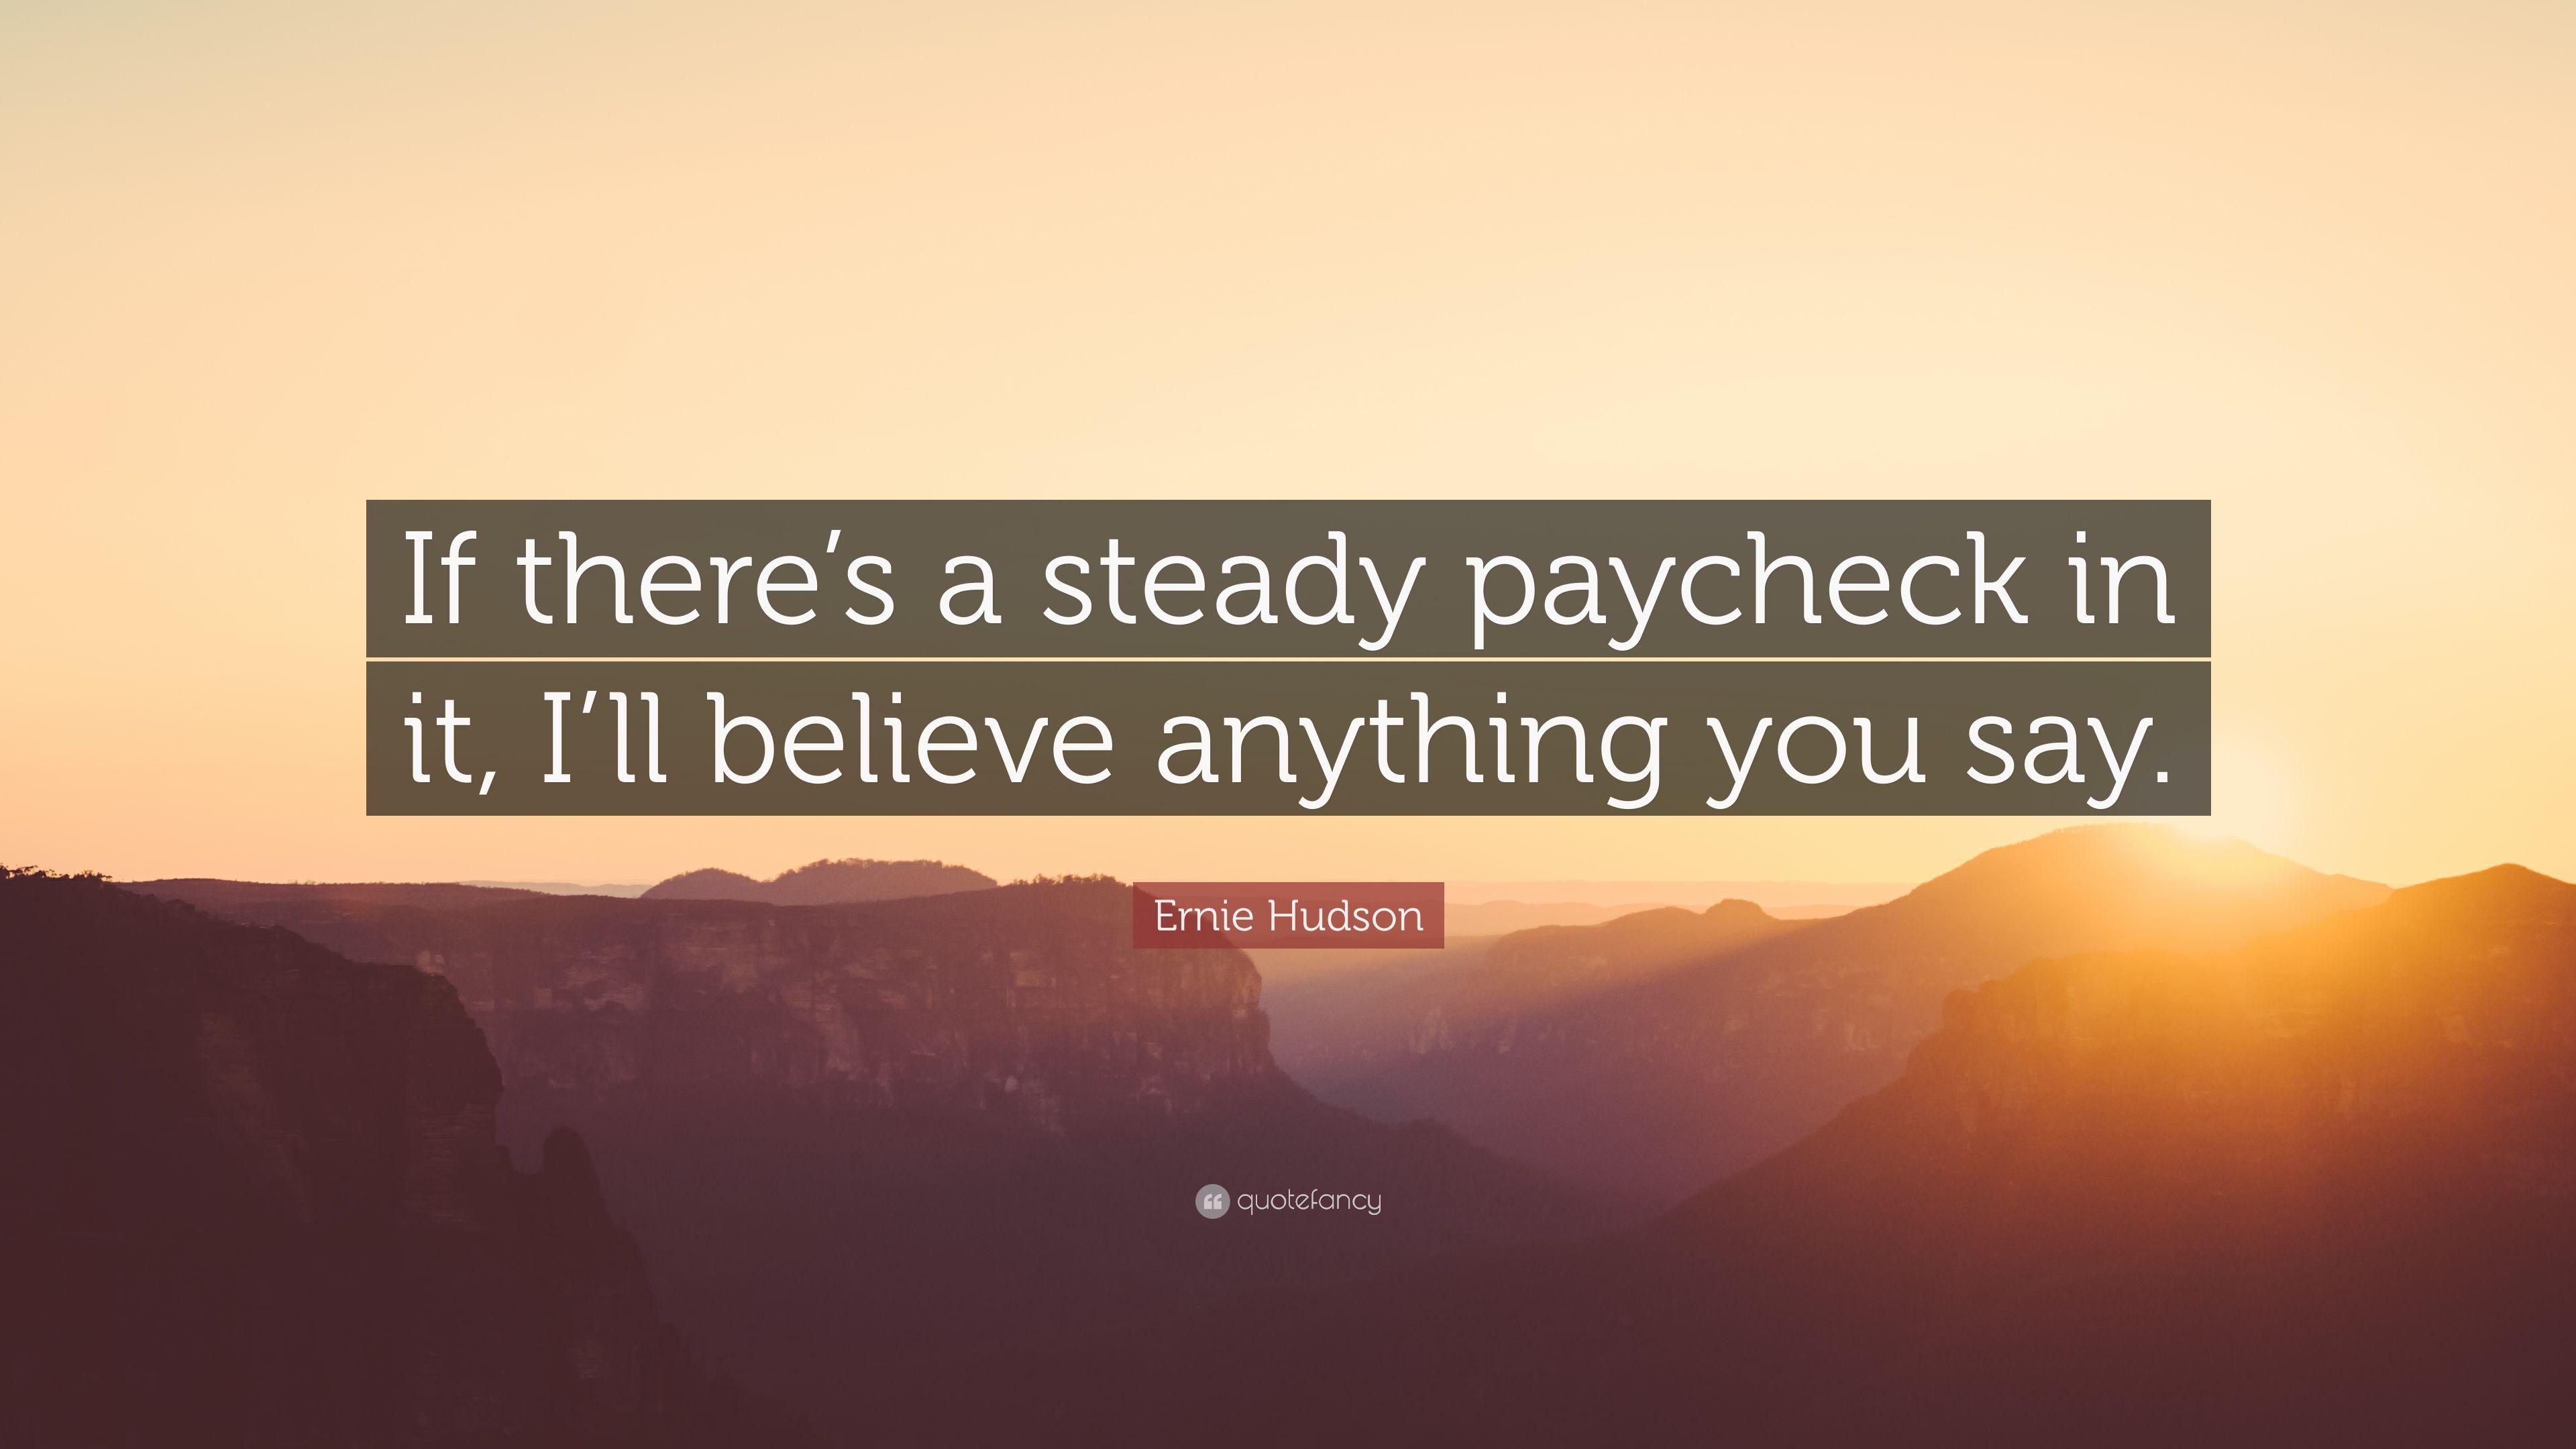 Ernie Hudson Quote: “If there's a steady paycheck in it, I'll